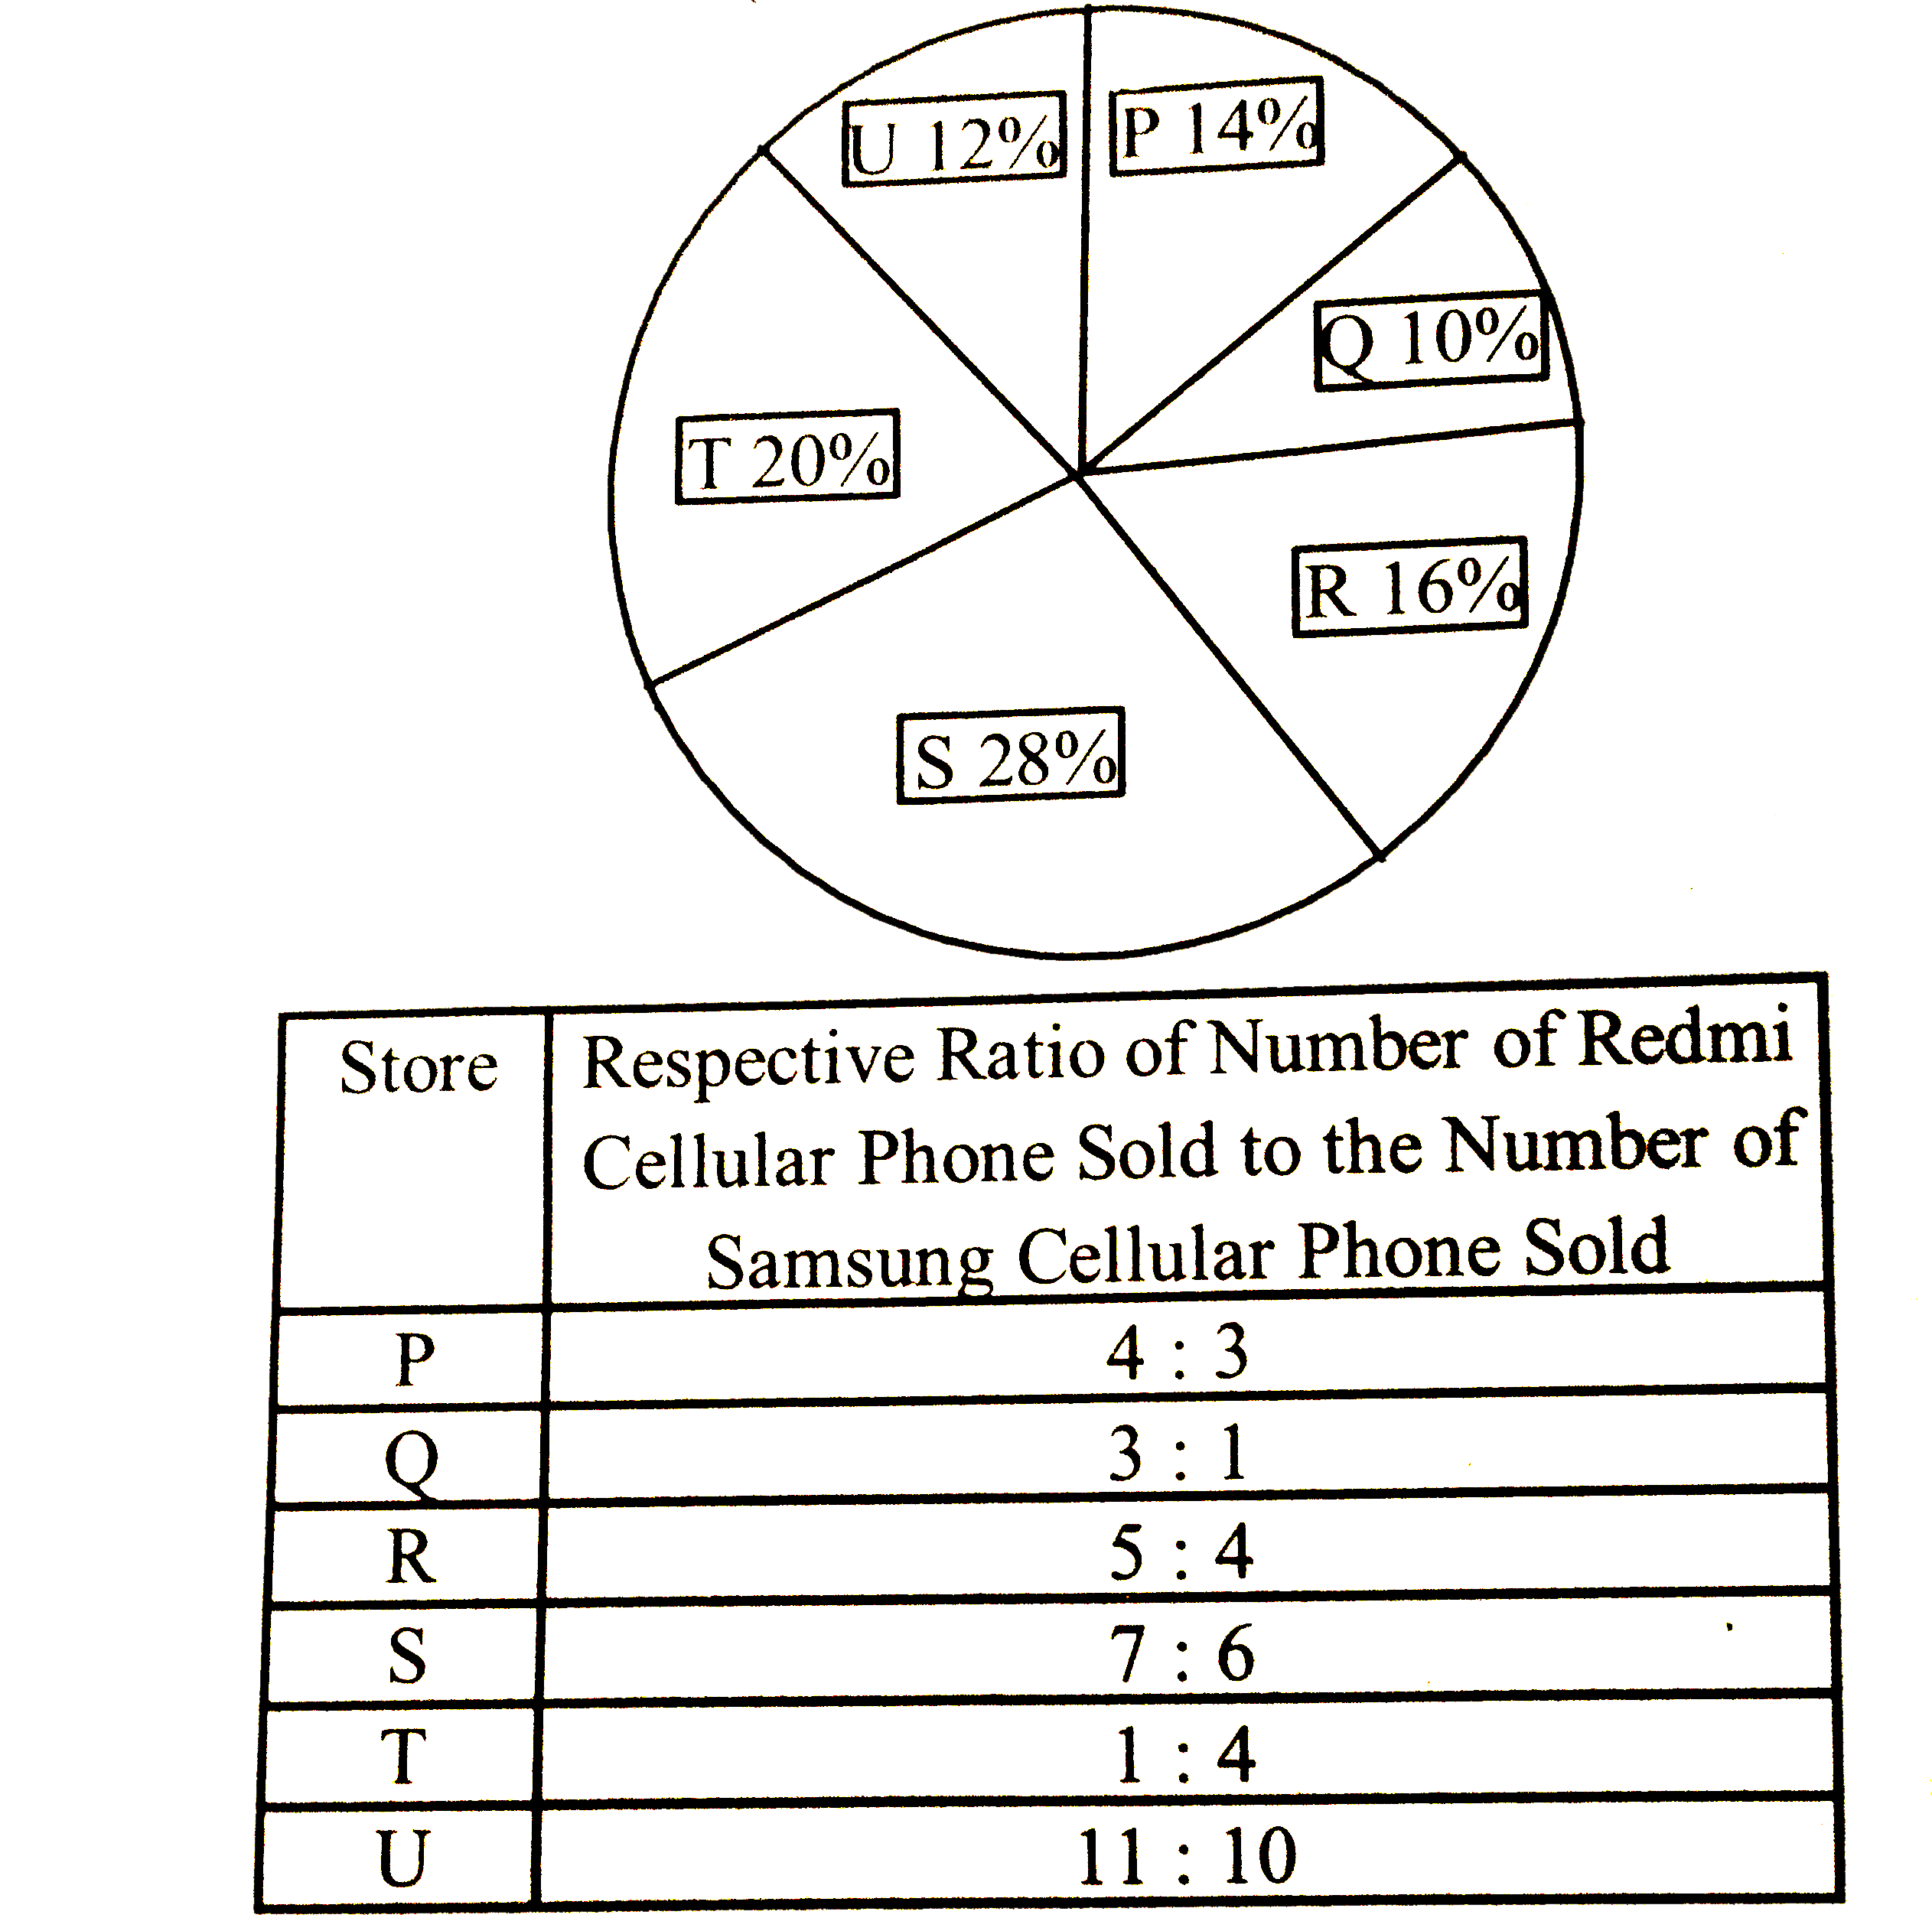 What is the central angle corresponding to total number of cellular phones (both Redmi and Samsung) sold by Store S ?